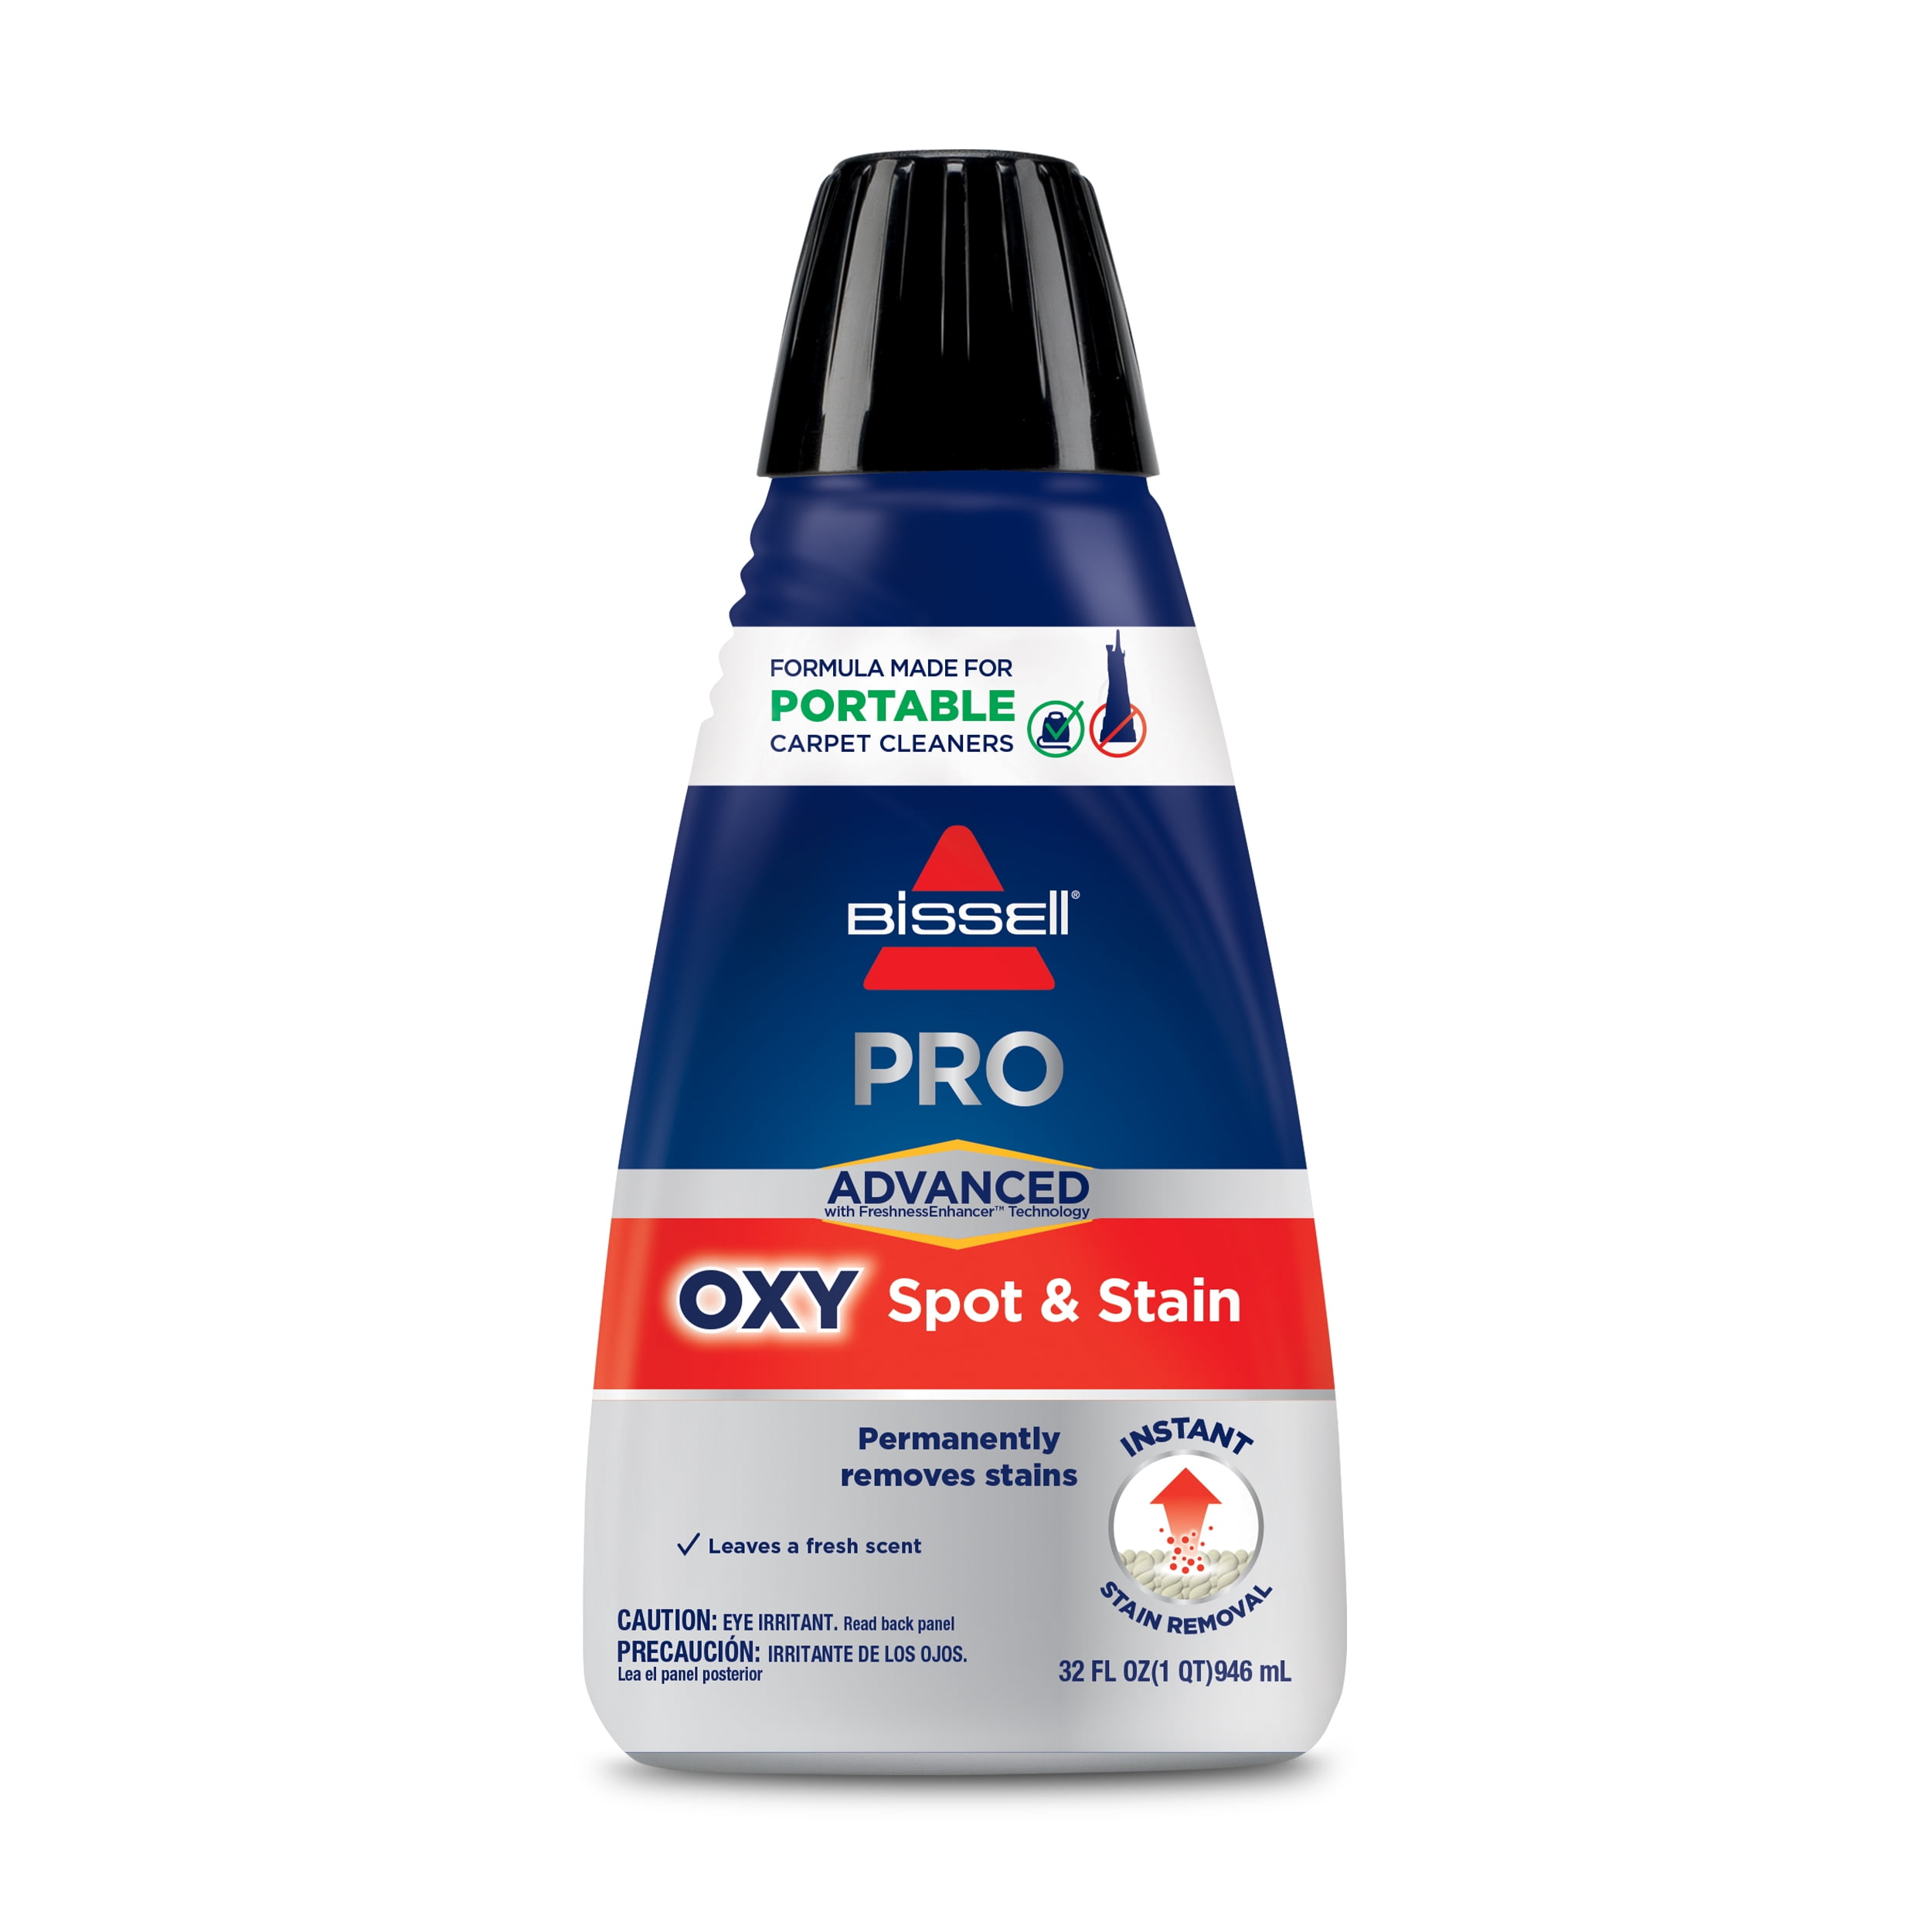 BISSELL Advanced Pro Oxy Spot & Stain Formula for Portable Spot Cleaners, 32oz, 2038W